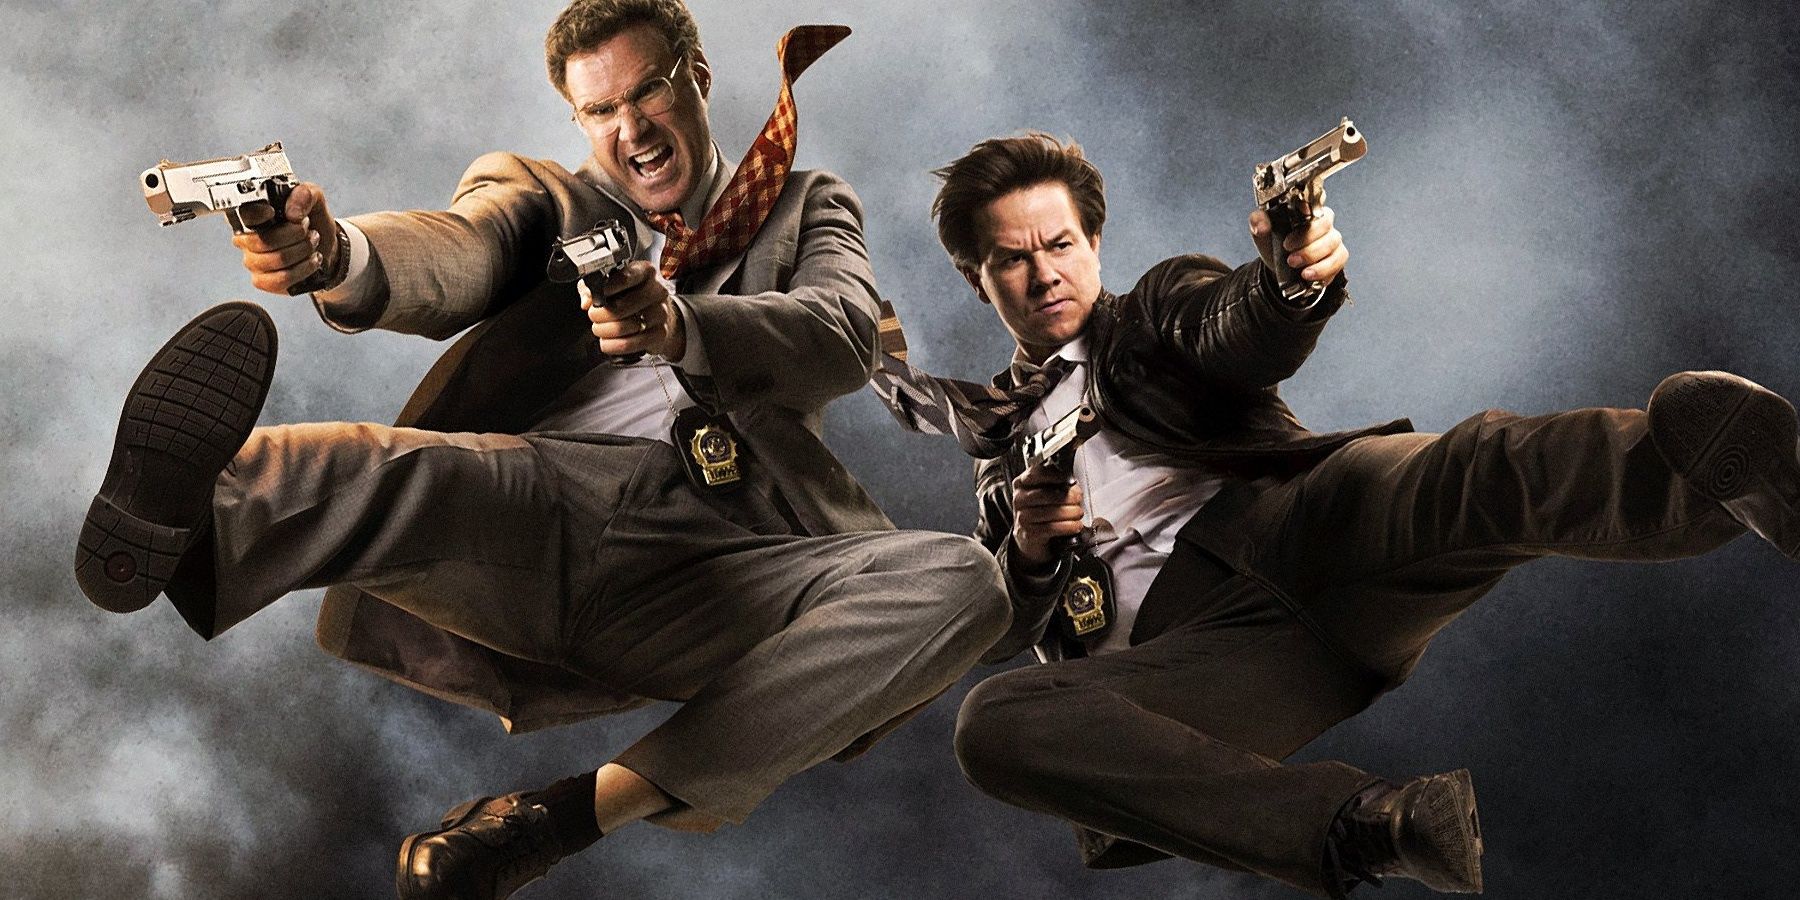 Will Ferrell and Mark Wahlberg shooting guns on the poster of The Other Guys